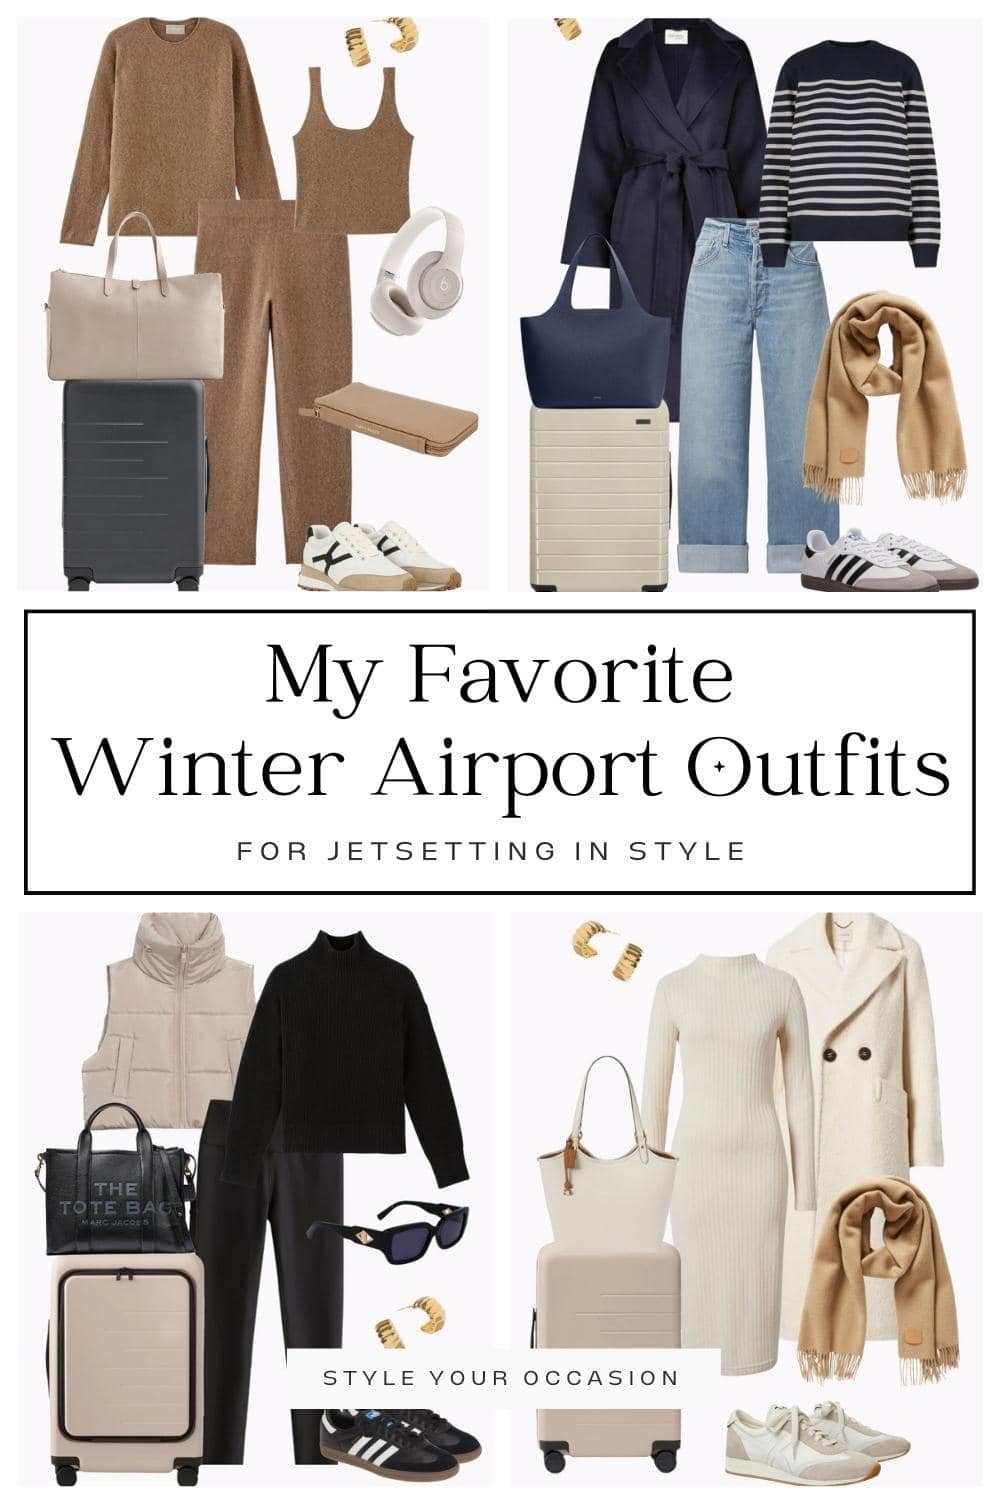 collage of outfit graphics with airport outfits for winter including neutral comfy clothing